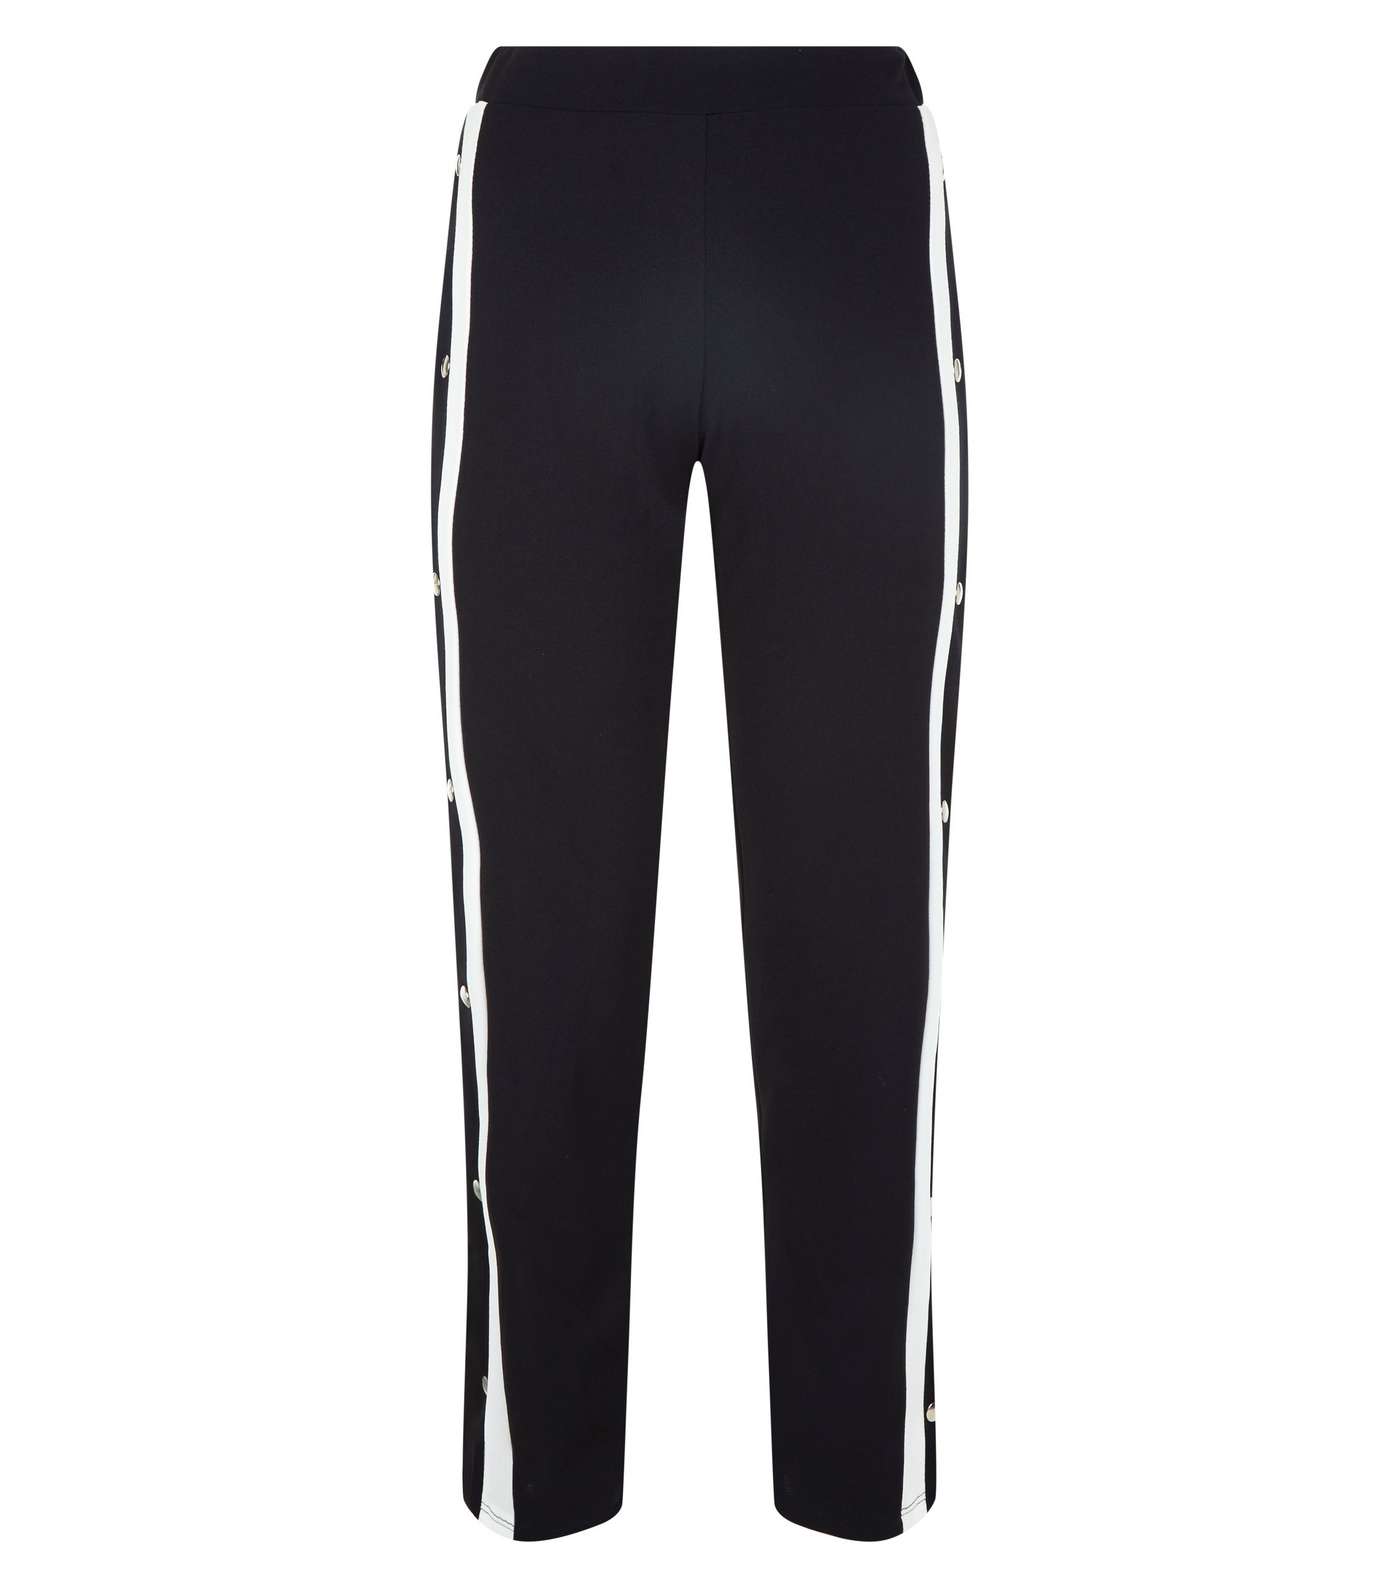 Cameo Rose Black Double Stripe Popper Side Trousers Image 4